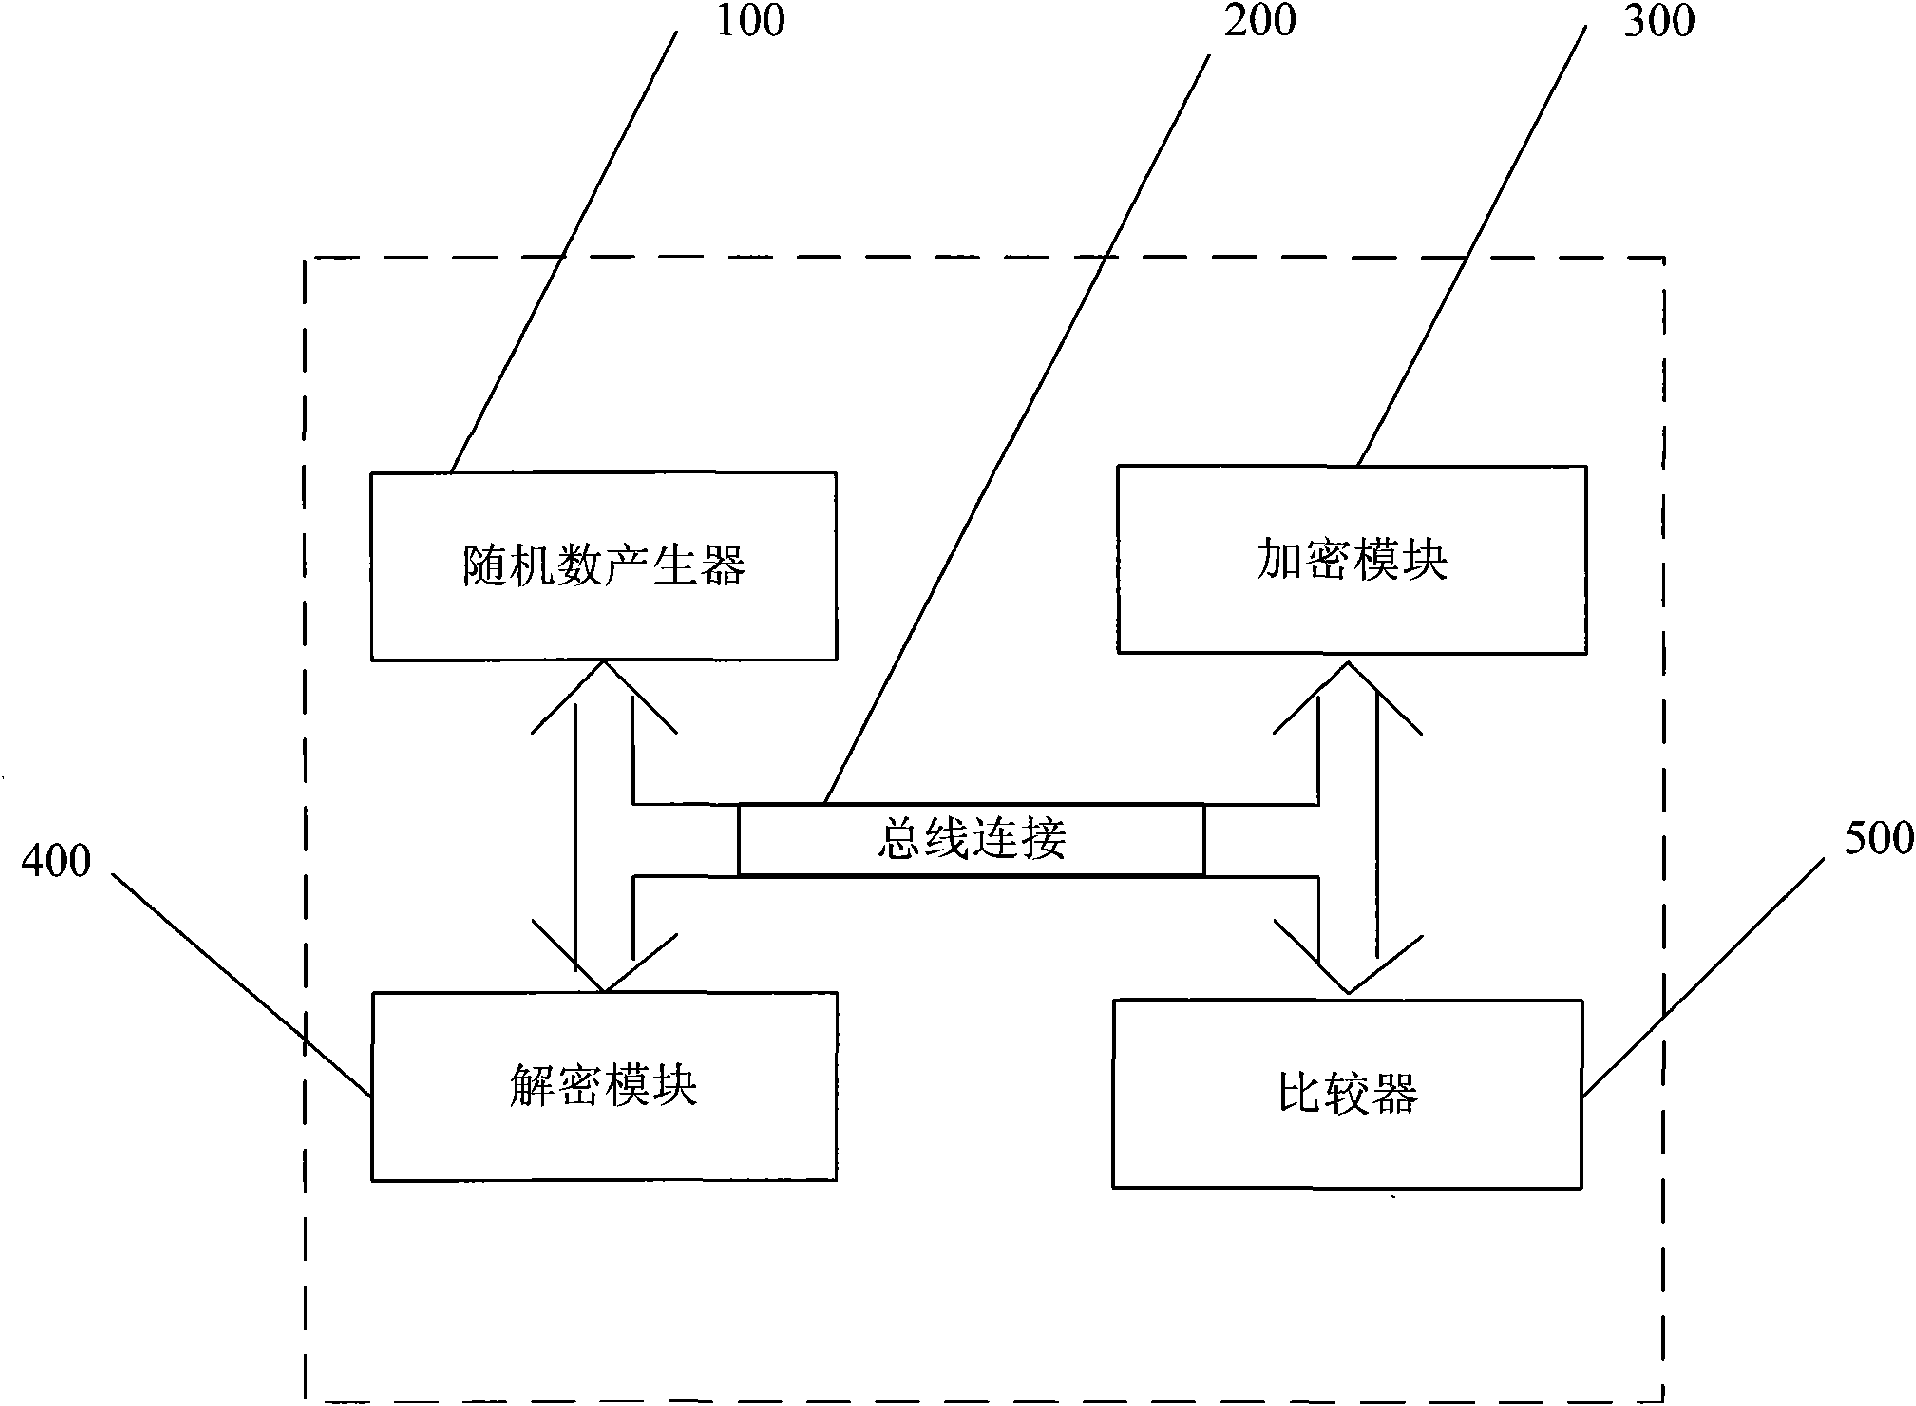 Two-way authentication system of player and projector for digital movies mobile playing